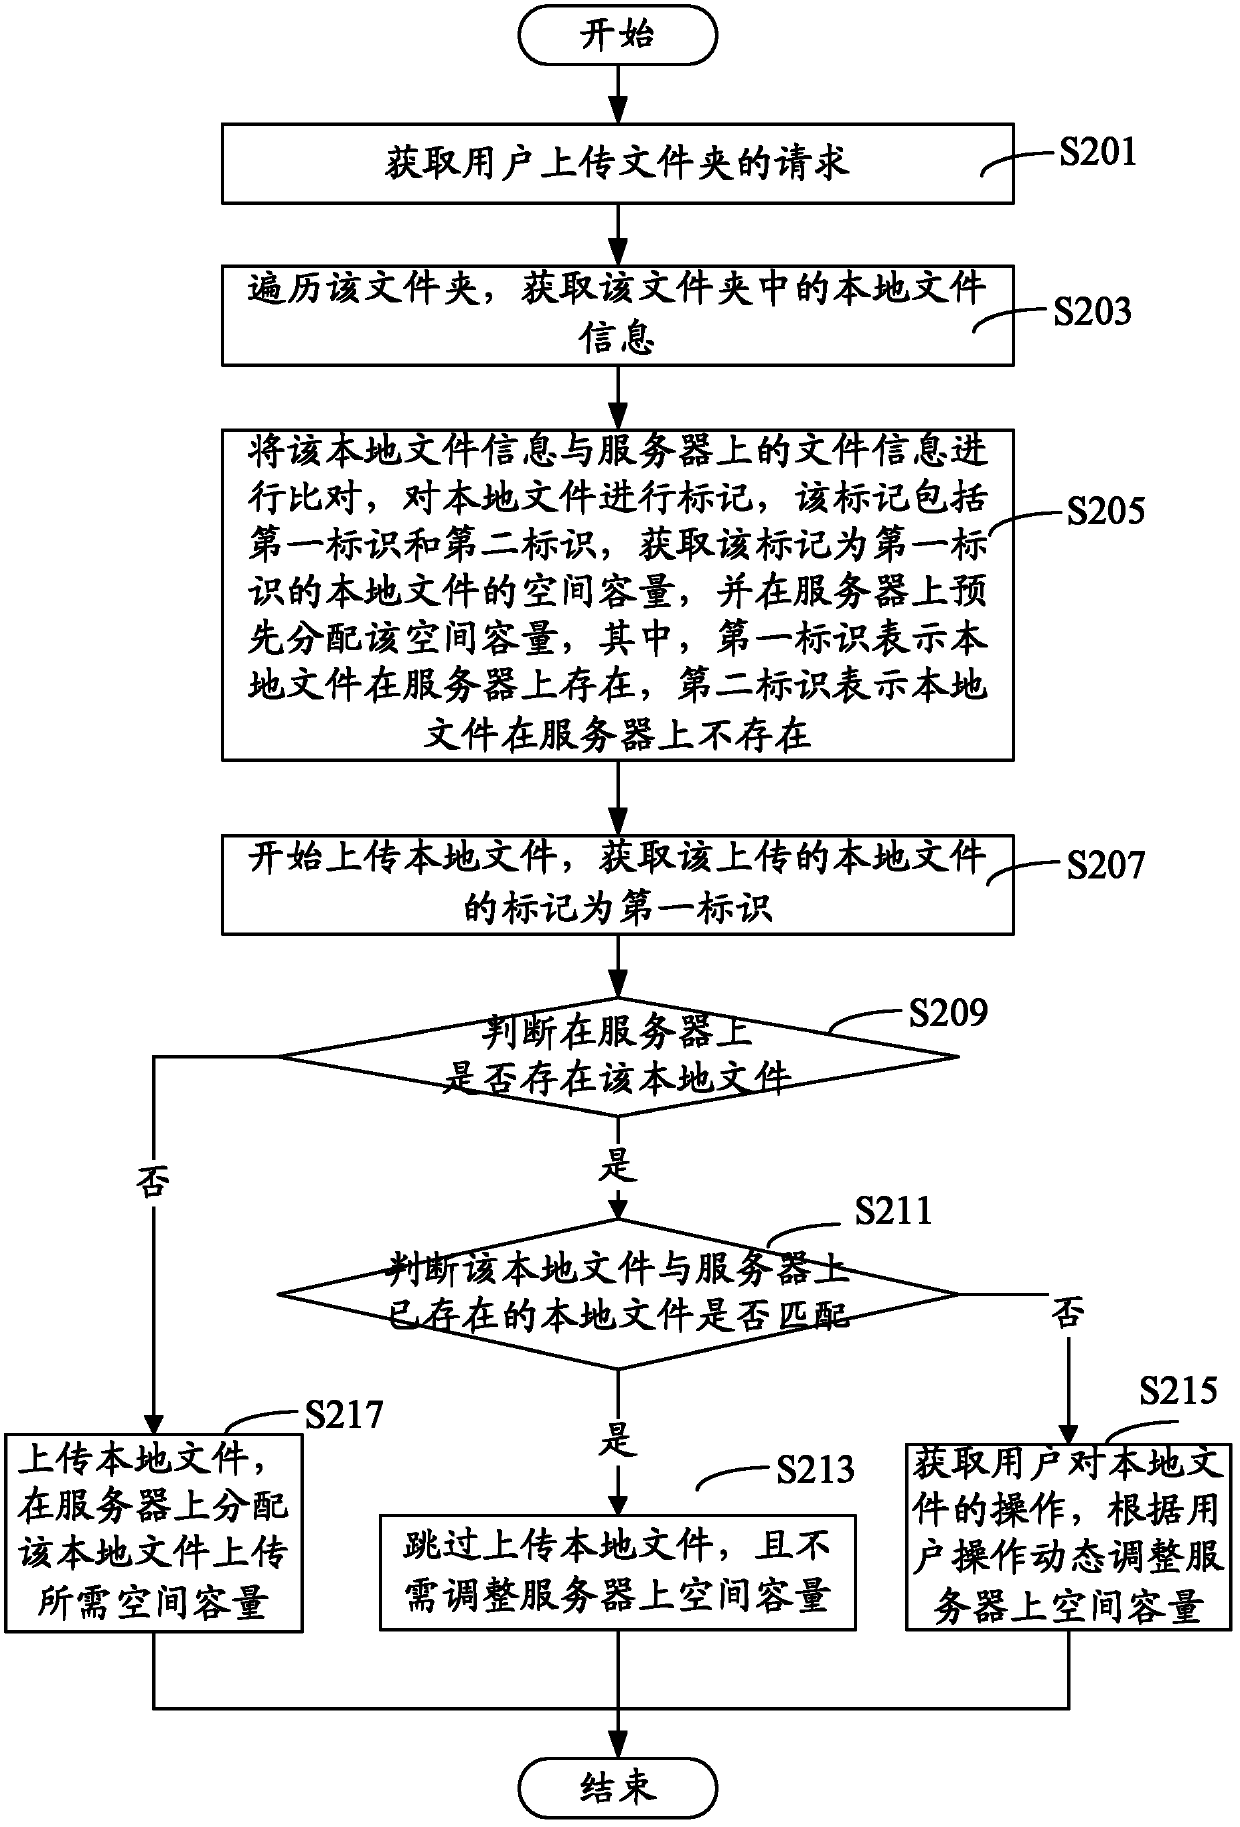 Method and system for dynamically adjusting space capacity at the moment of uploading folder